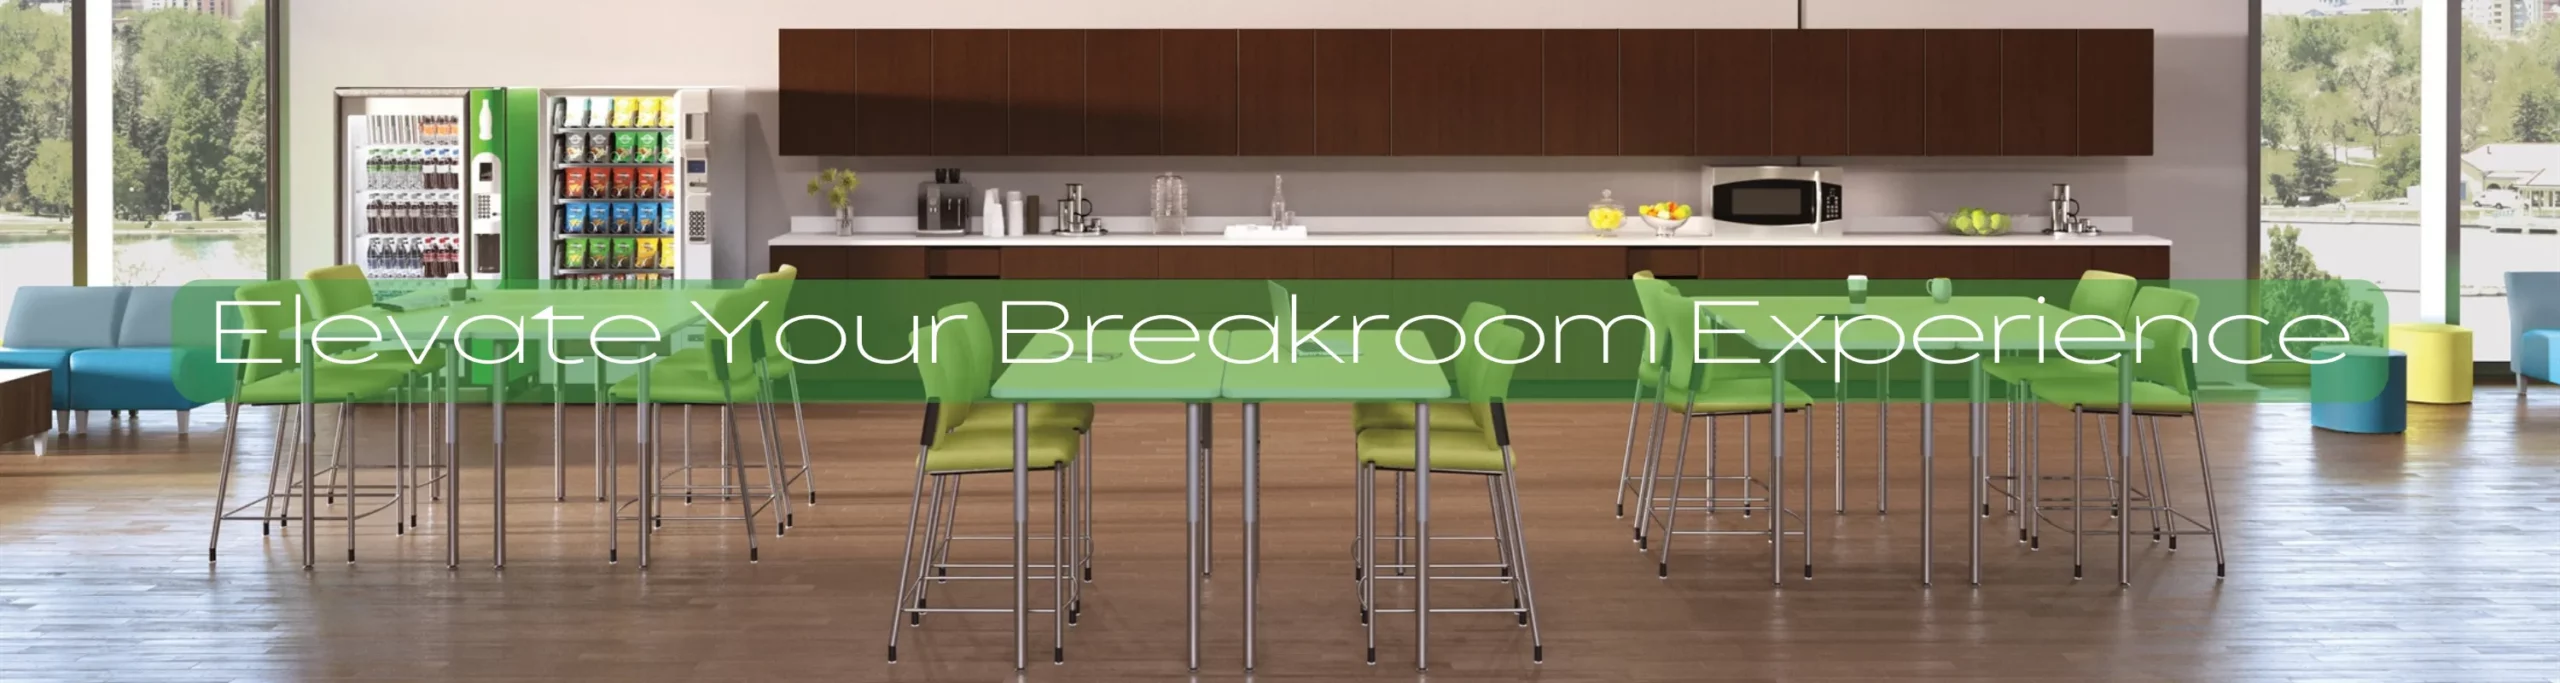 Elevate Your Breakroom Experience - Banner